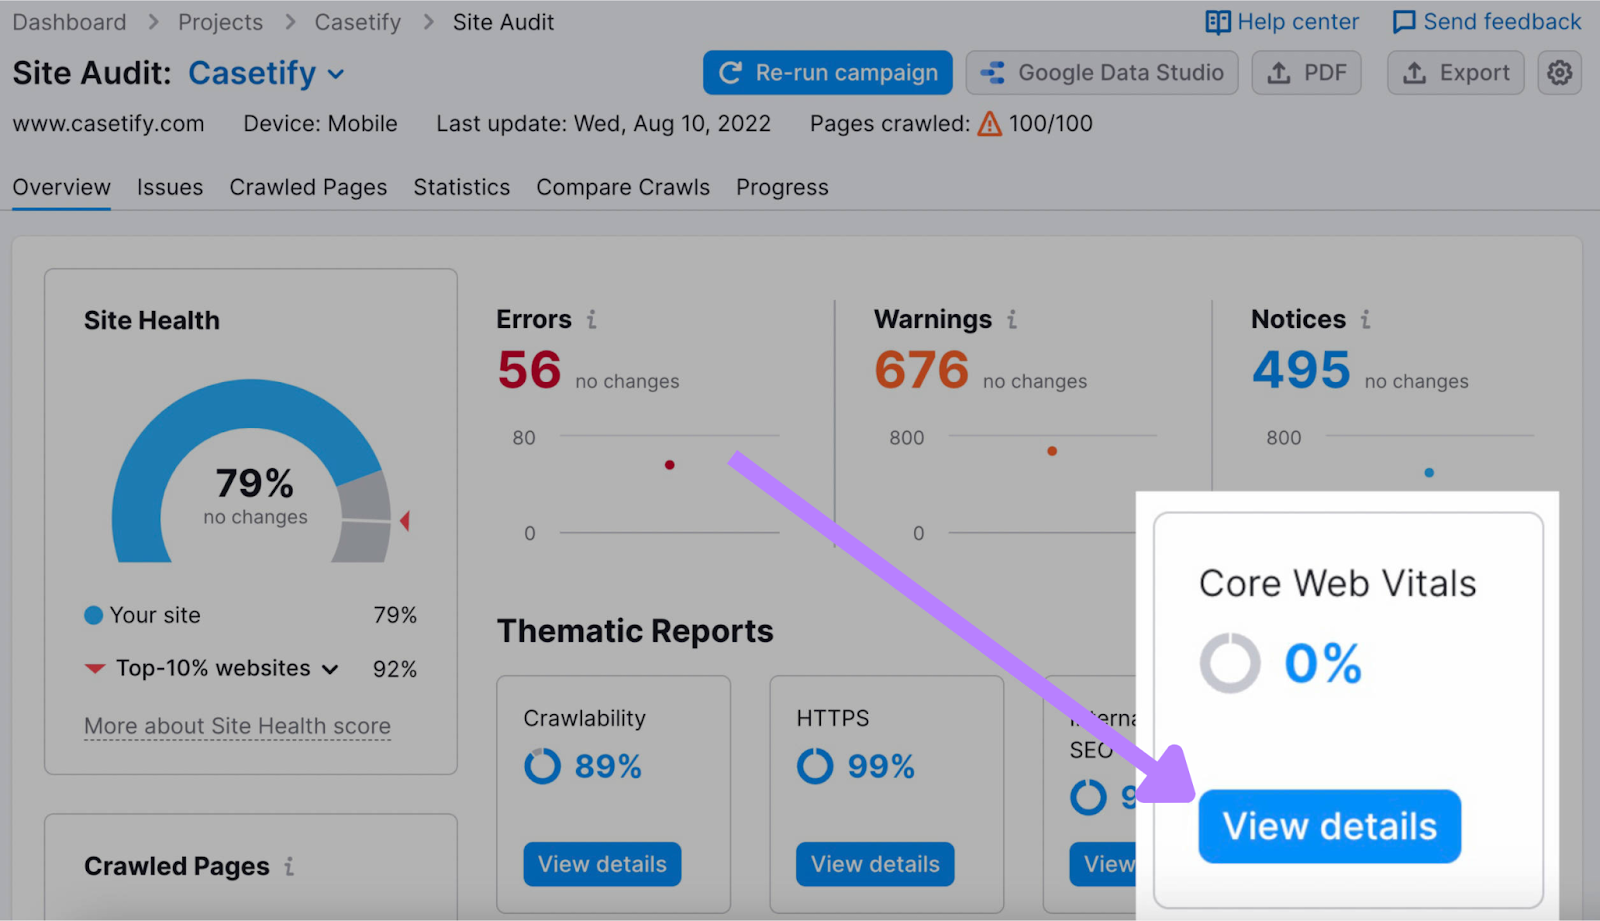 "Core Web Vitals" widget highlighted in Site Audit dashboard